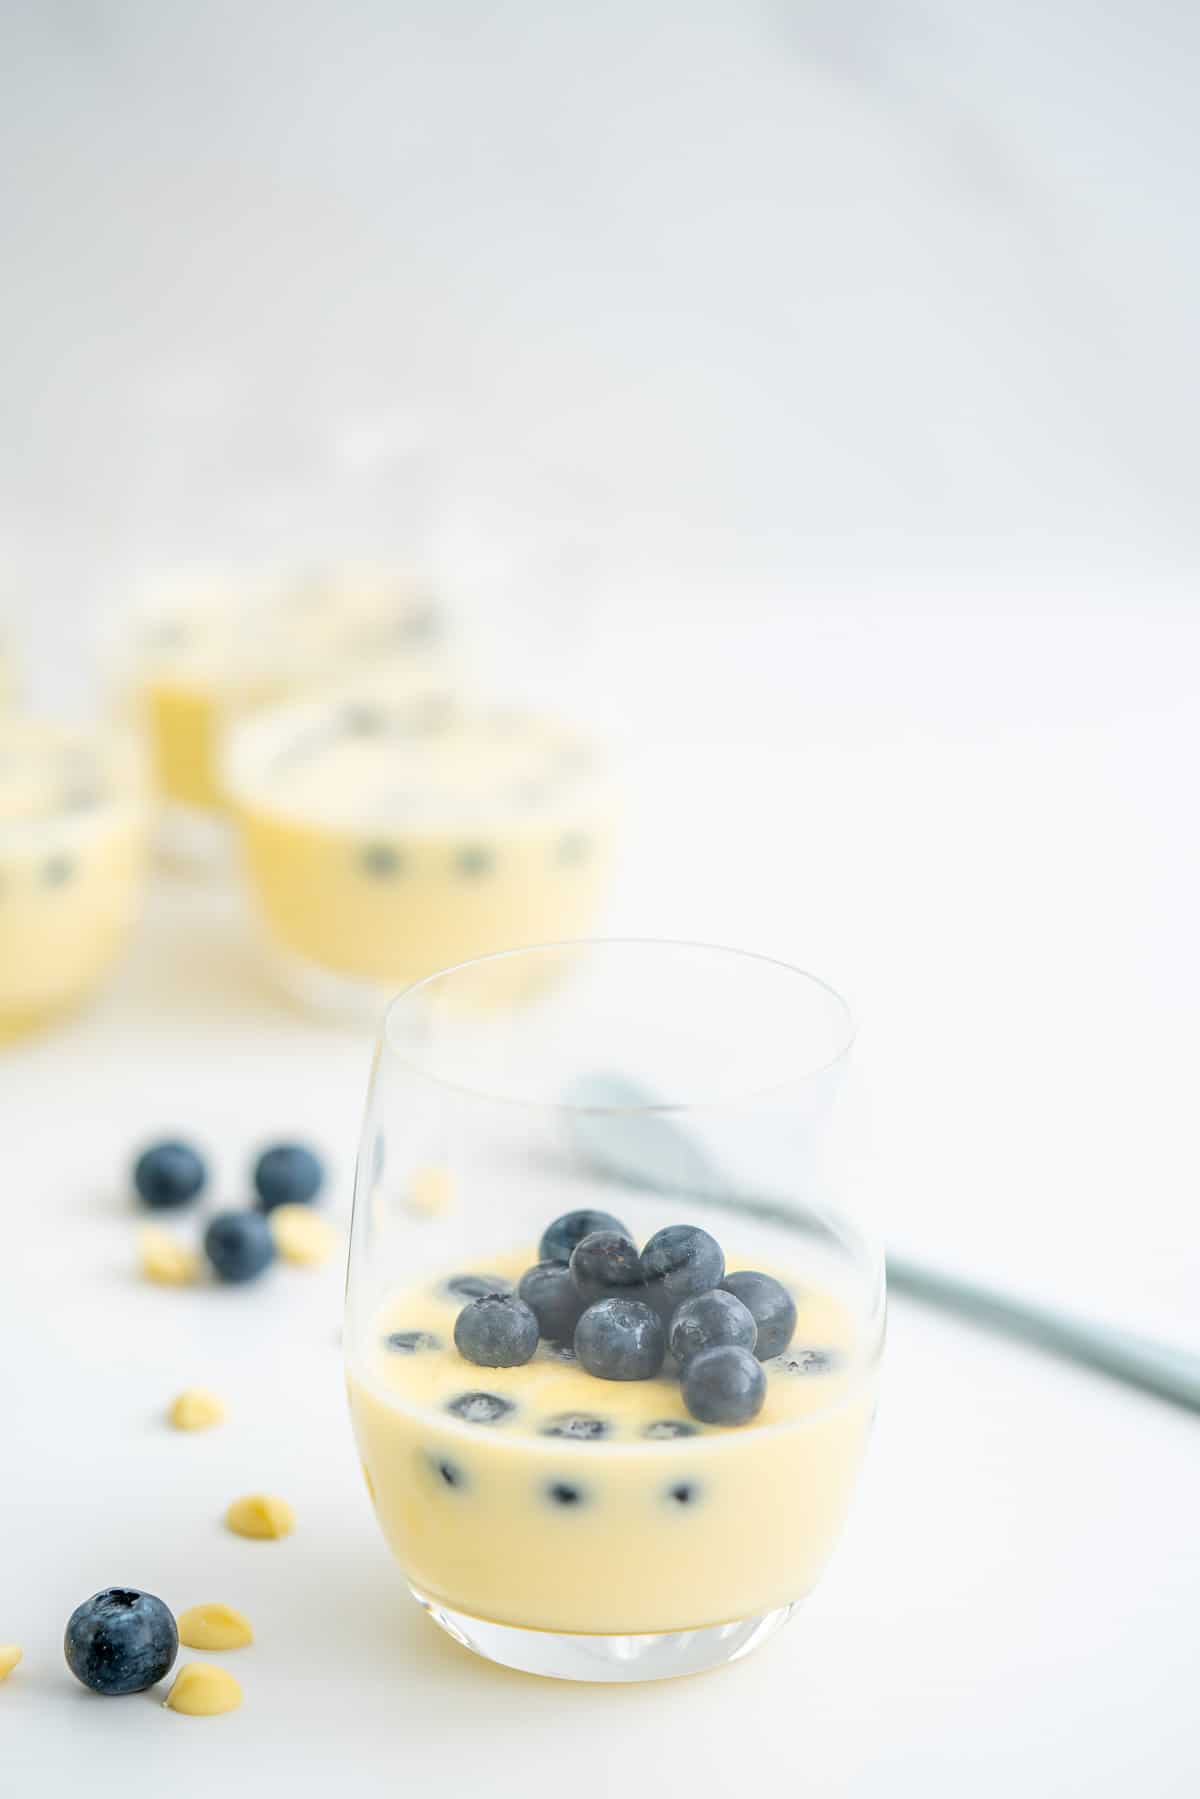 A glass filled with white chocolate mousse garnished with fresh blueberries